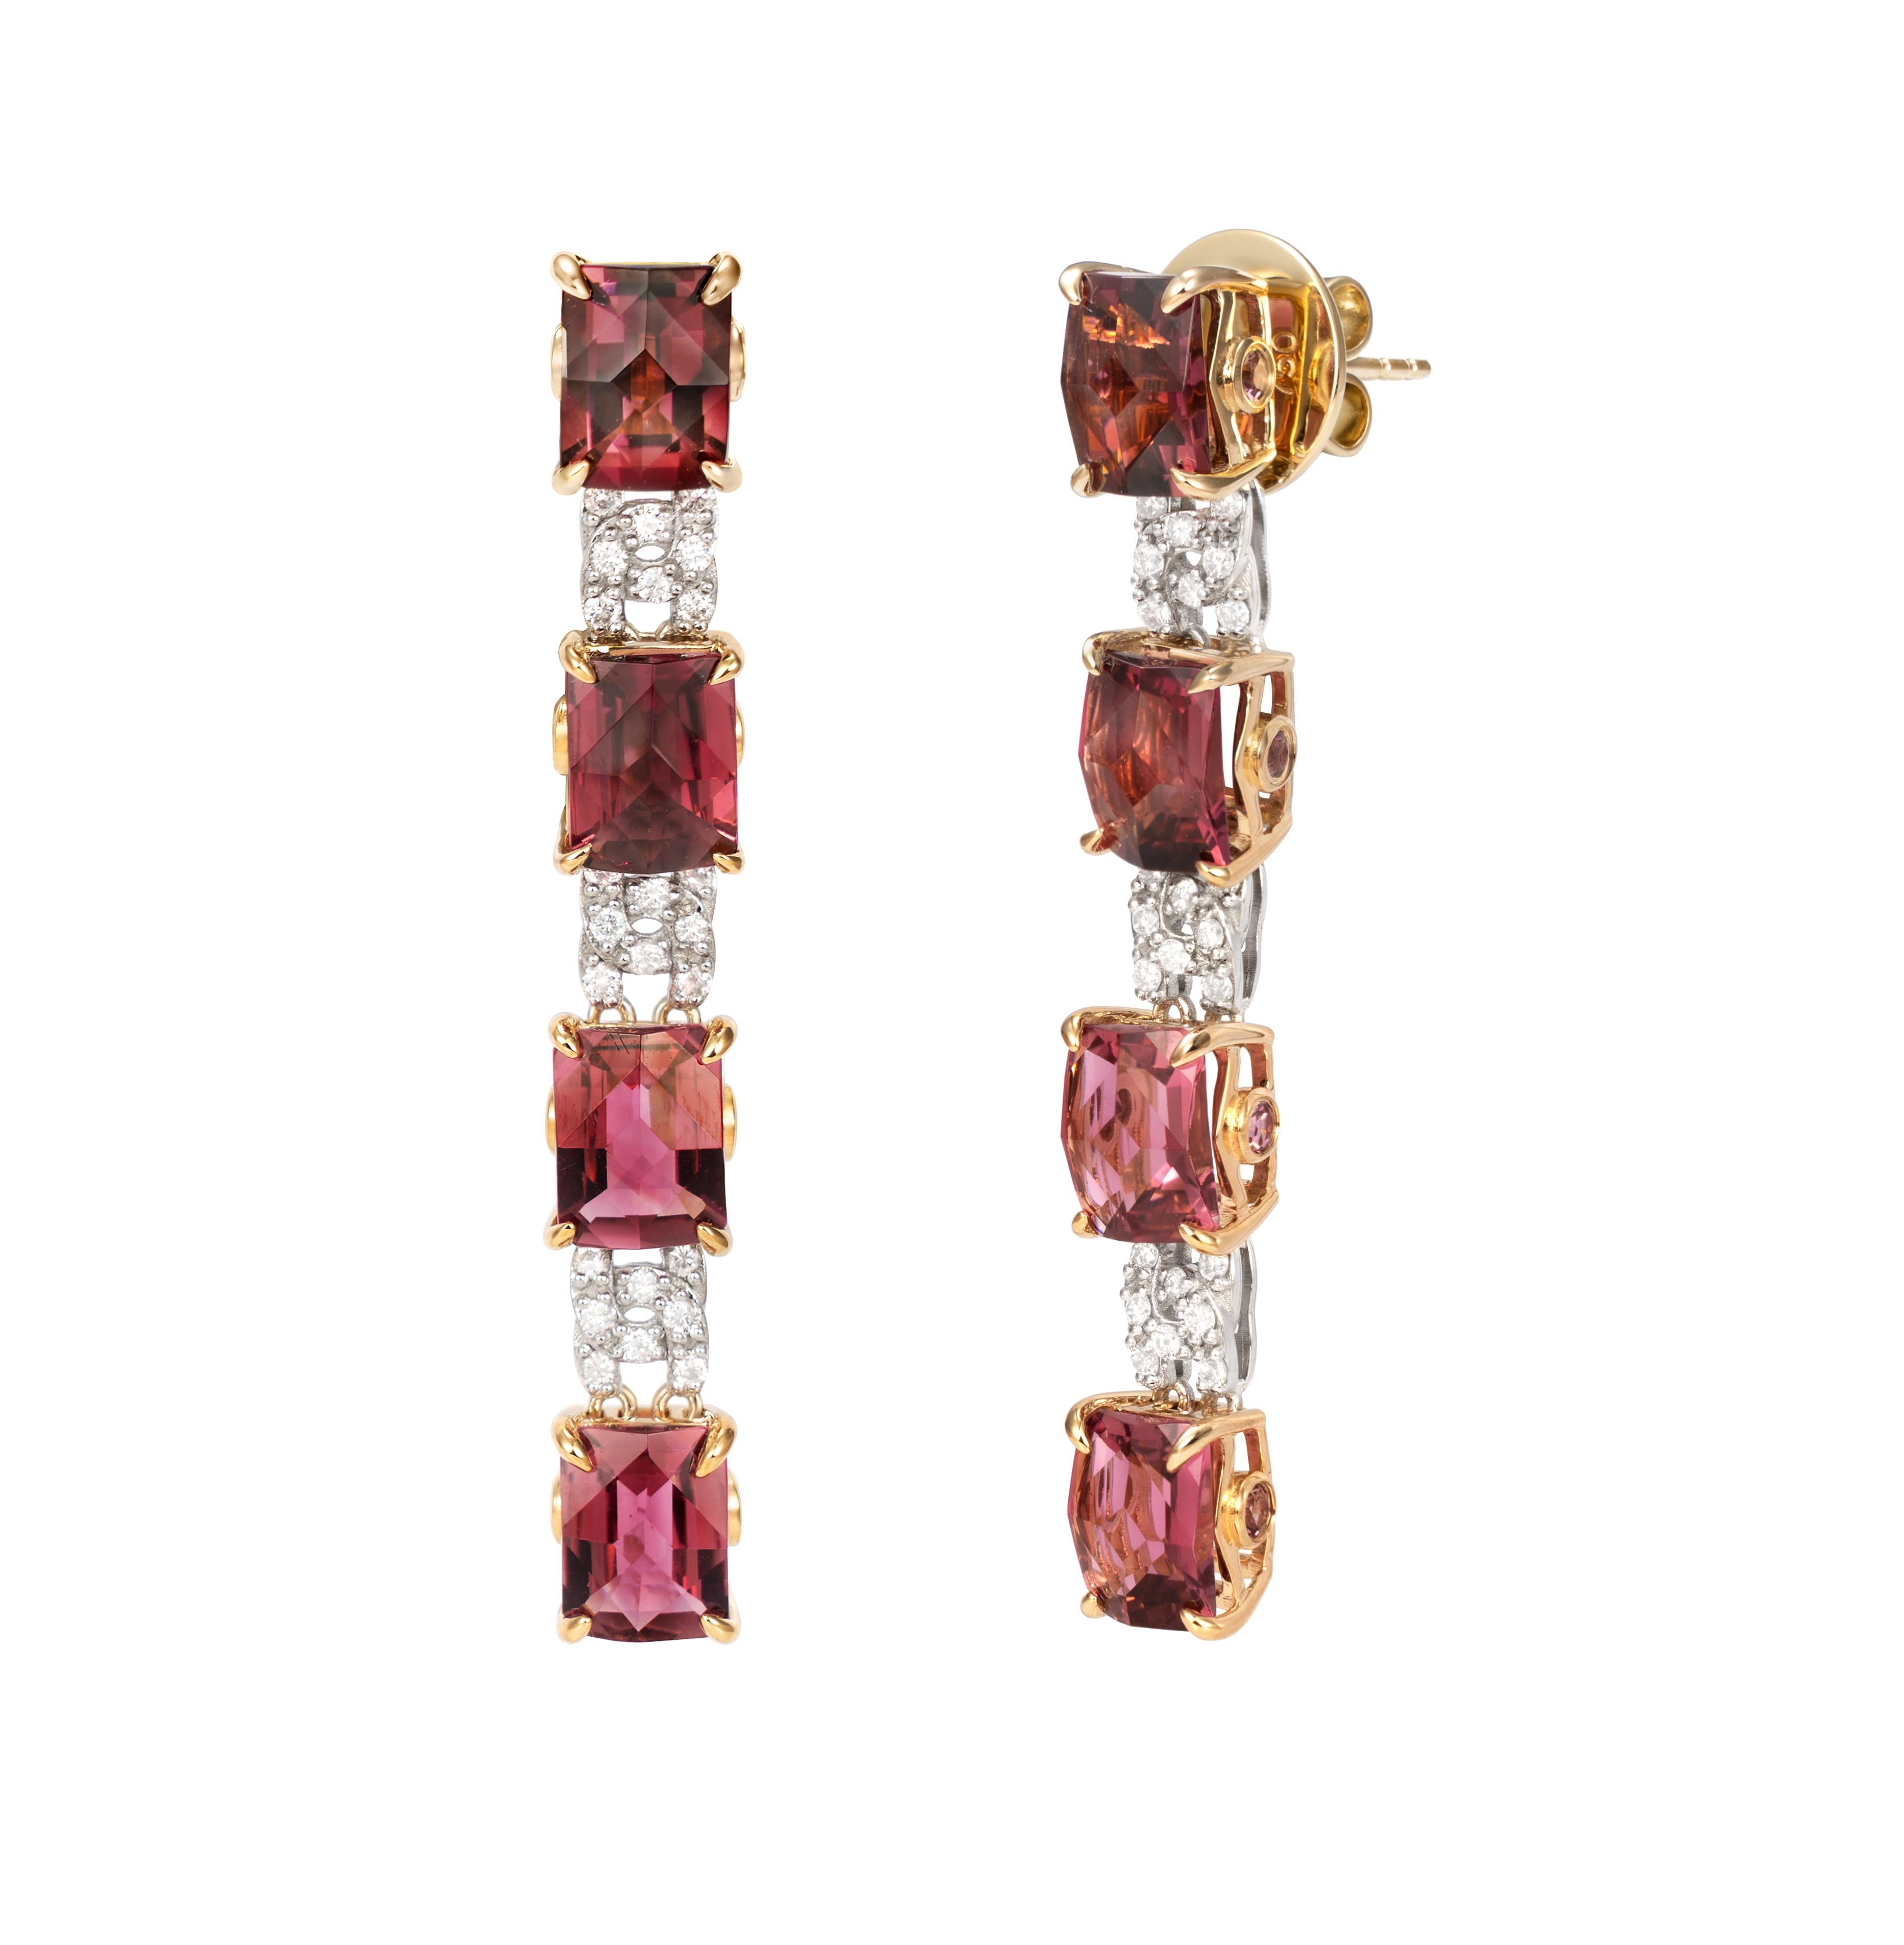 Light and easy to wear these earrings showcase multicolor fancy cut pink tourmaline in a unique cushion cut accented with  diamonds. These earrings are dainty yet have a great pop of color from the vibrant gems.

Fancy Cut Ombre Pink Tourmaline